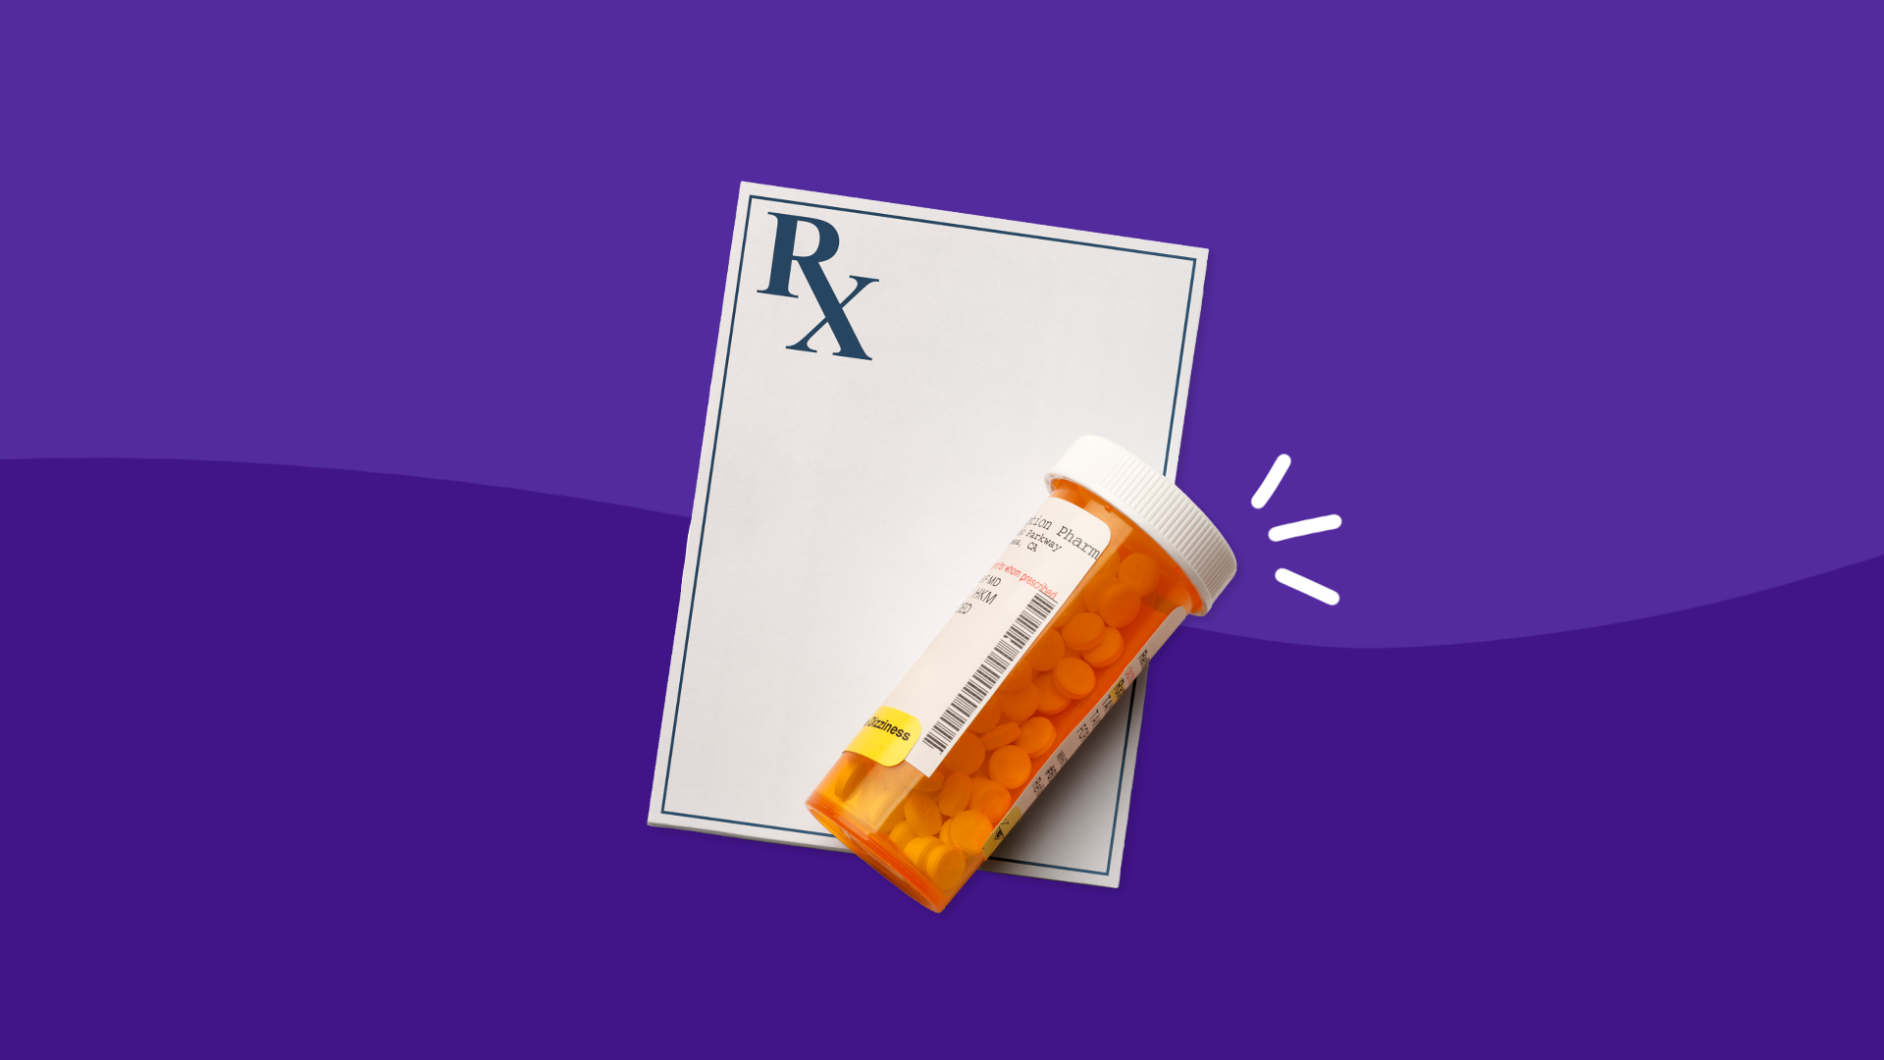 Prescription pad with pill bottle: How to avoid Vraylar side effects